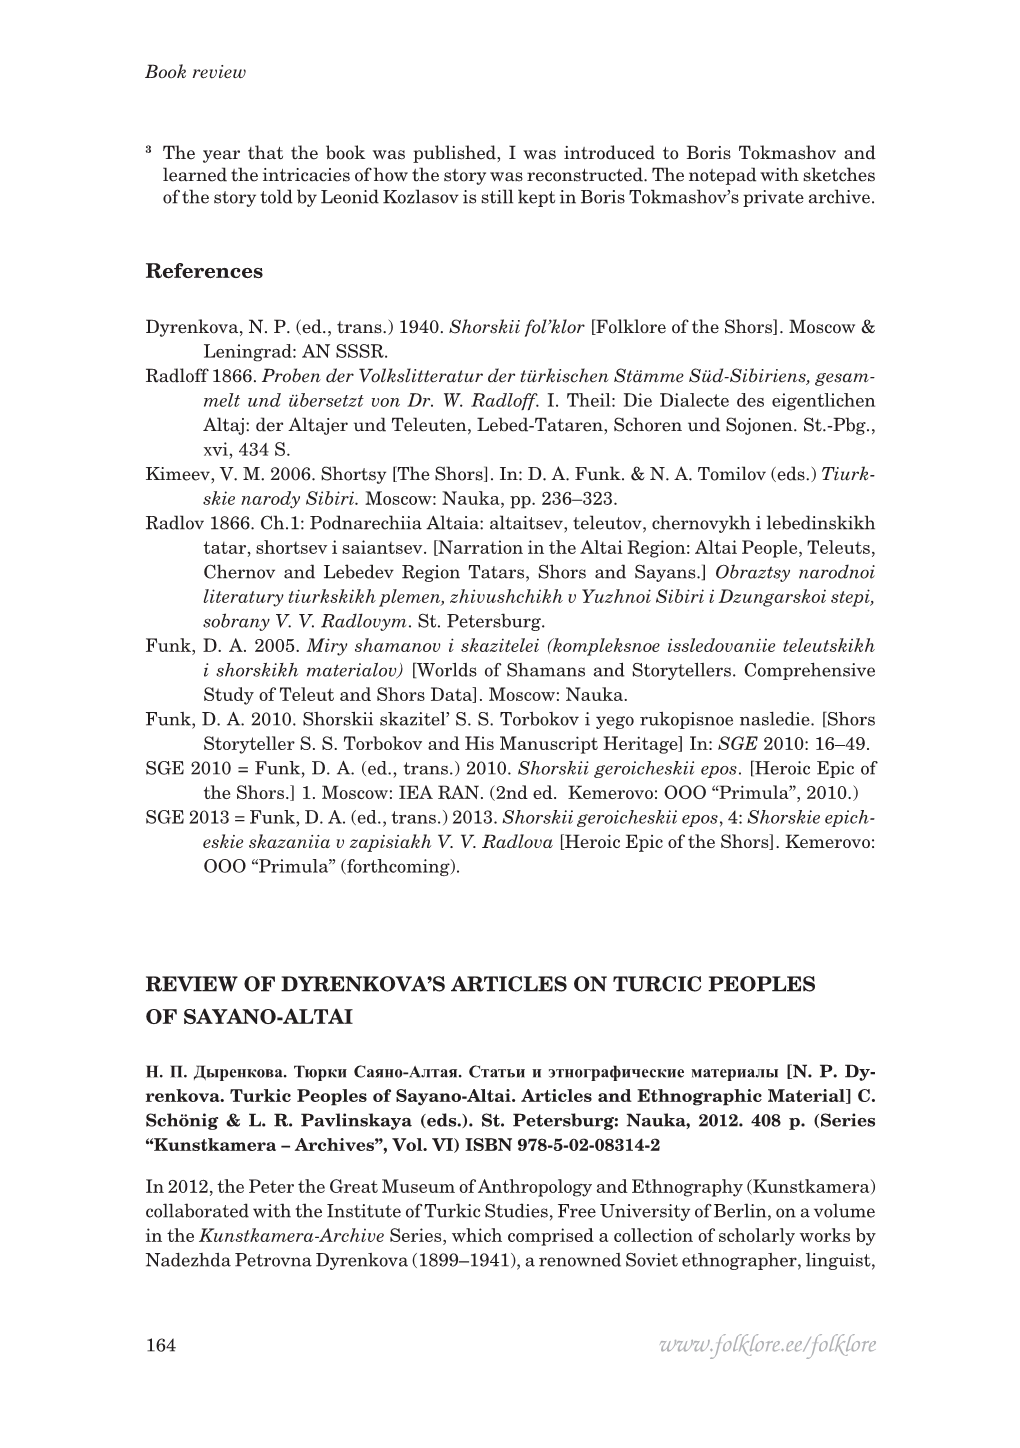 Review of Dyrenkova's Articles on Turcic Peoples of Sayano-Altai